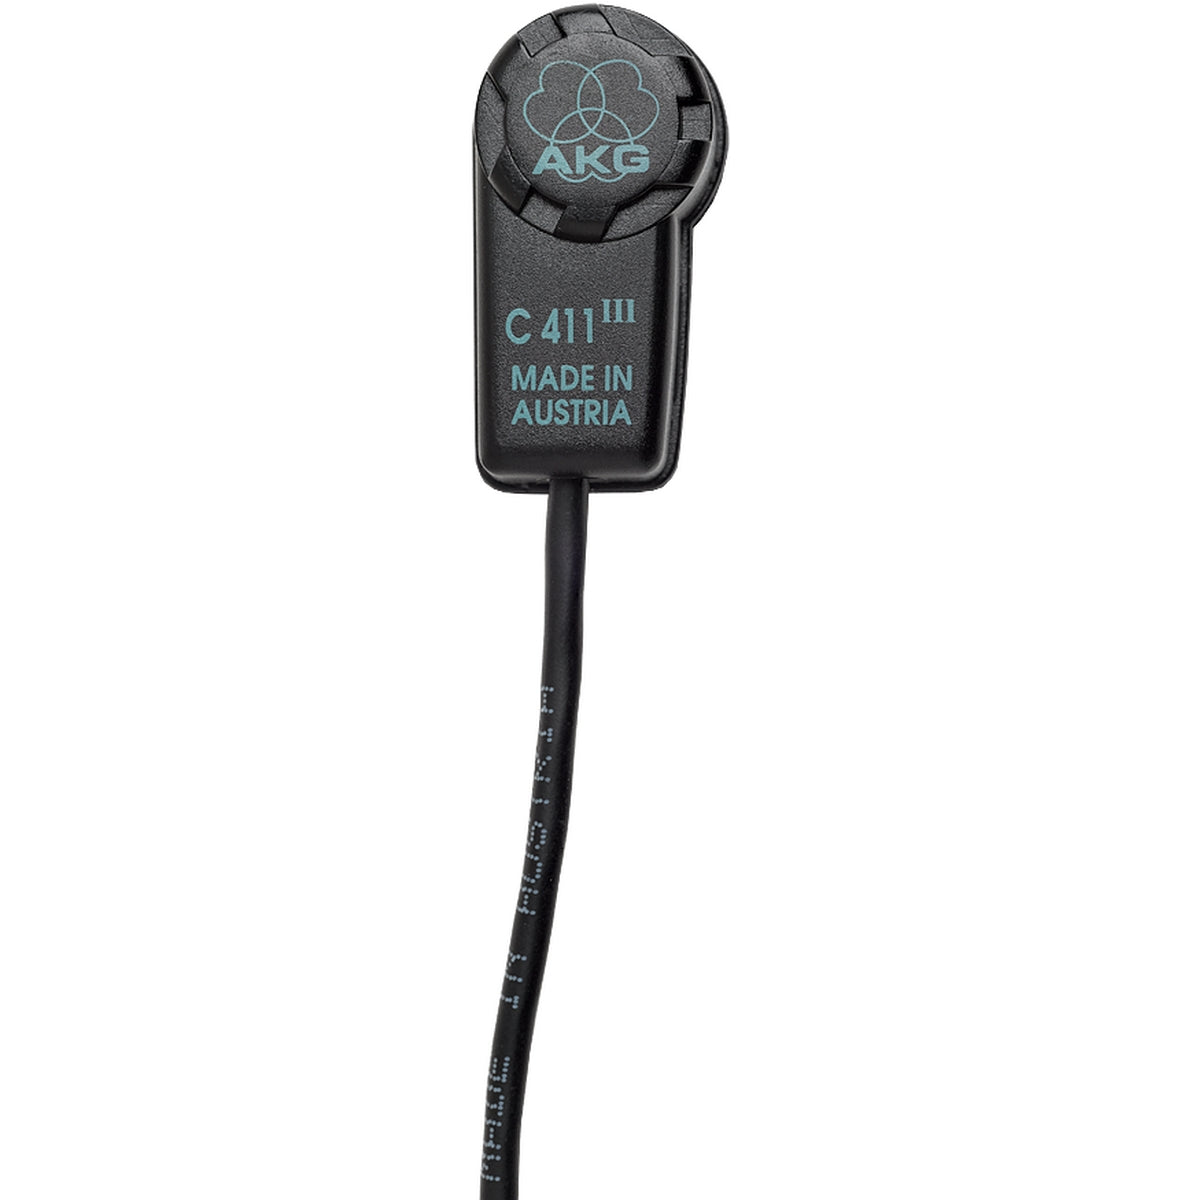 AKG C411 PP | Ultralight Vibration Pickup with Standard XLR Connector